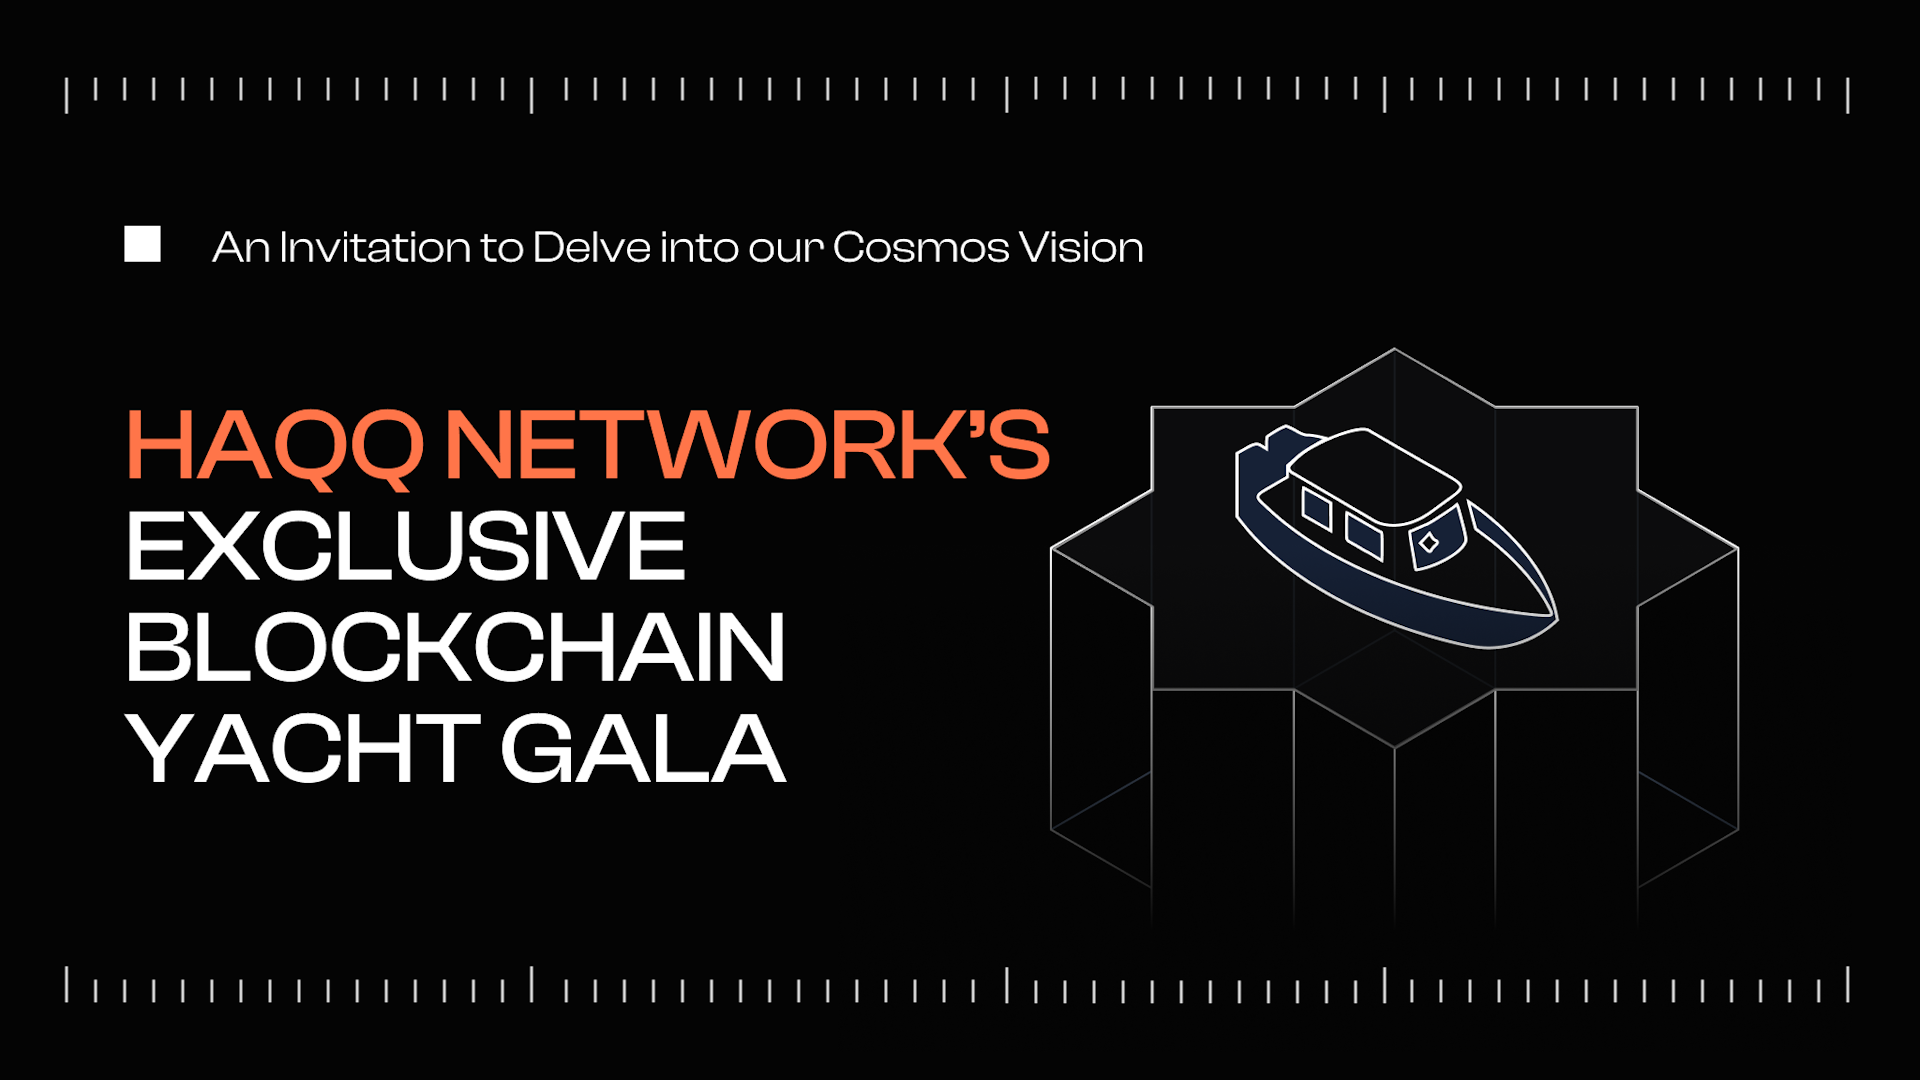 HAQQ Network’s Token 2049 Side Event: An Exclusive Blockchain Yacht Gala to Explore our Cosmos Vision